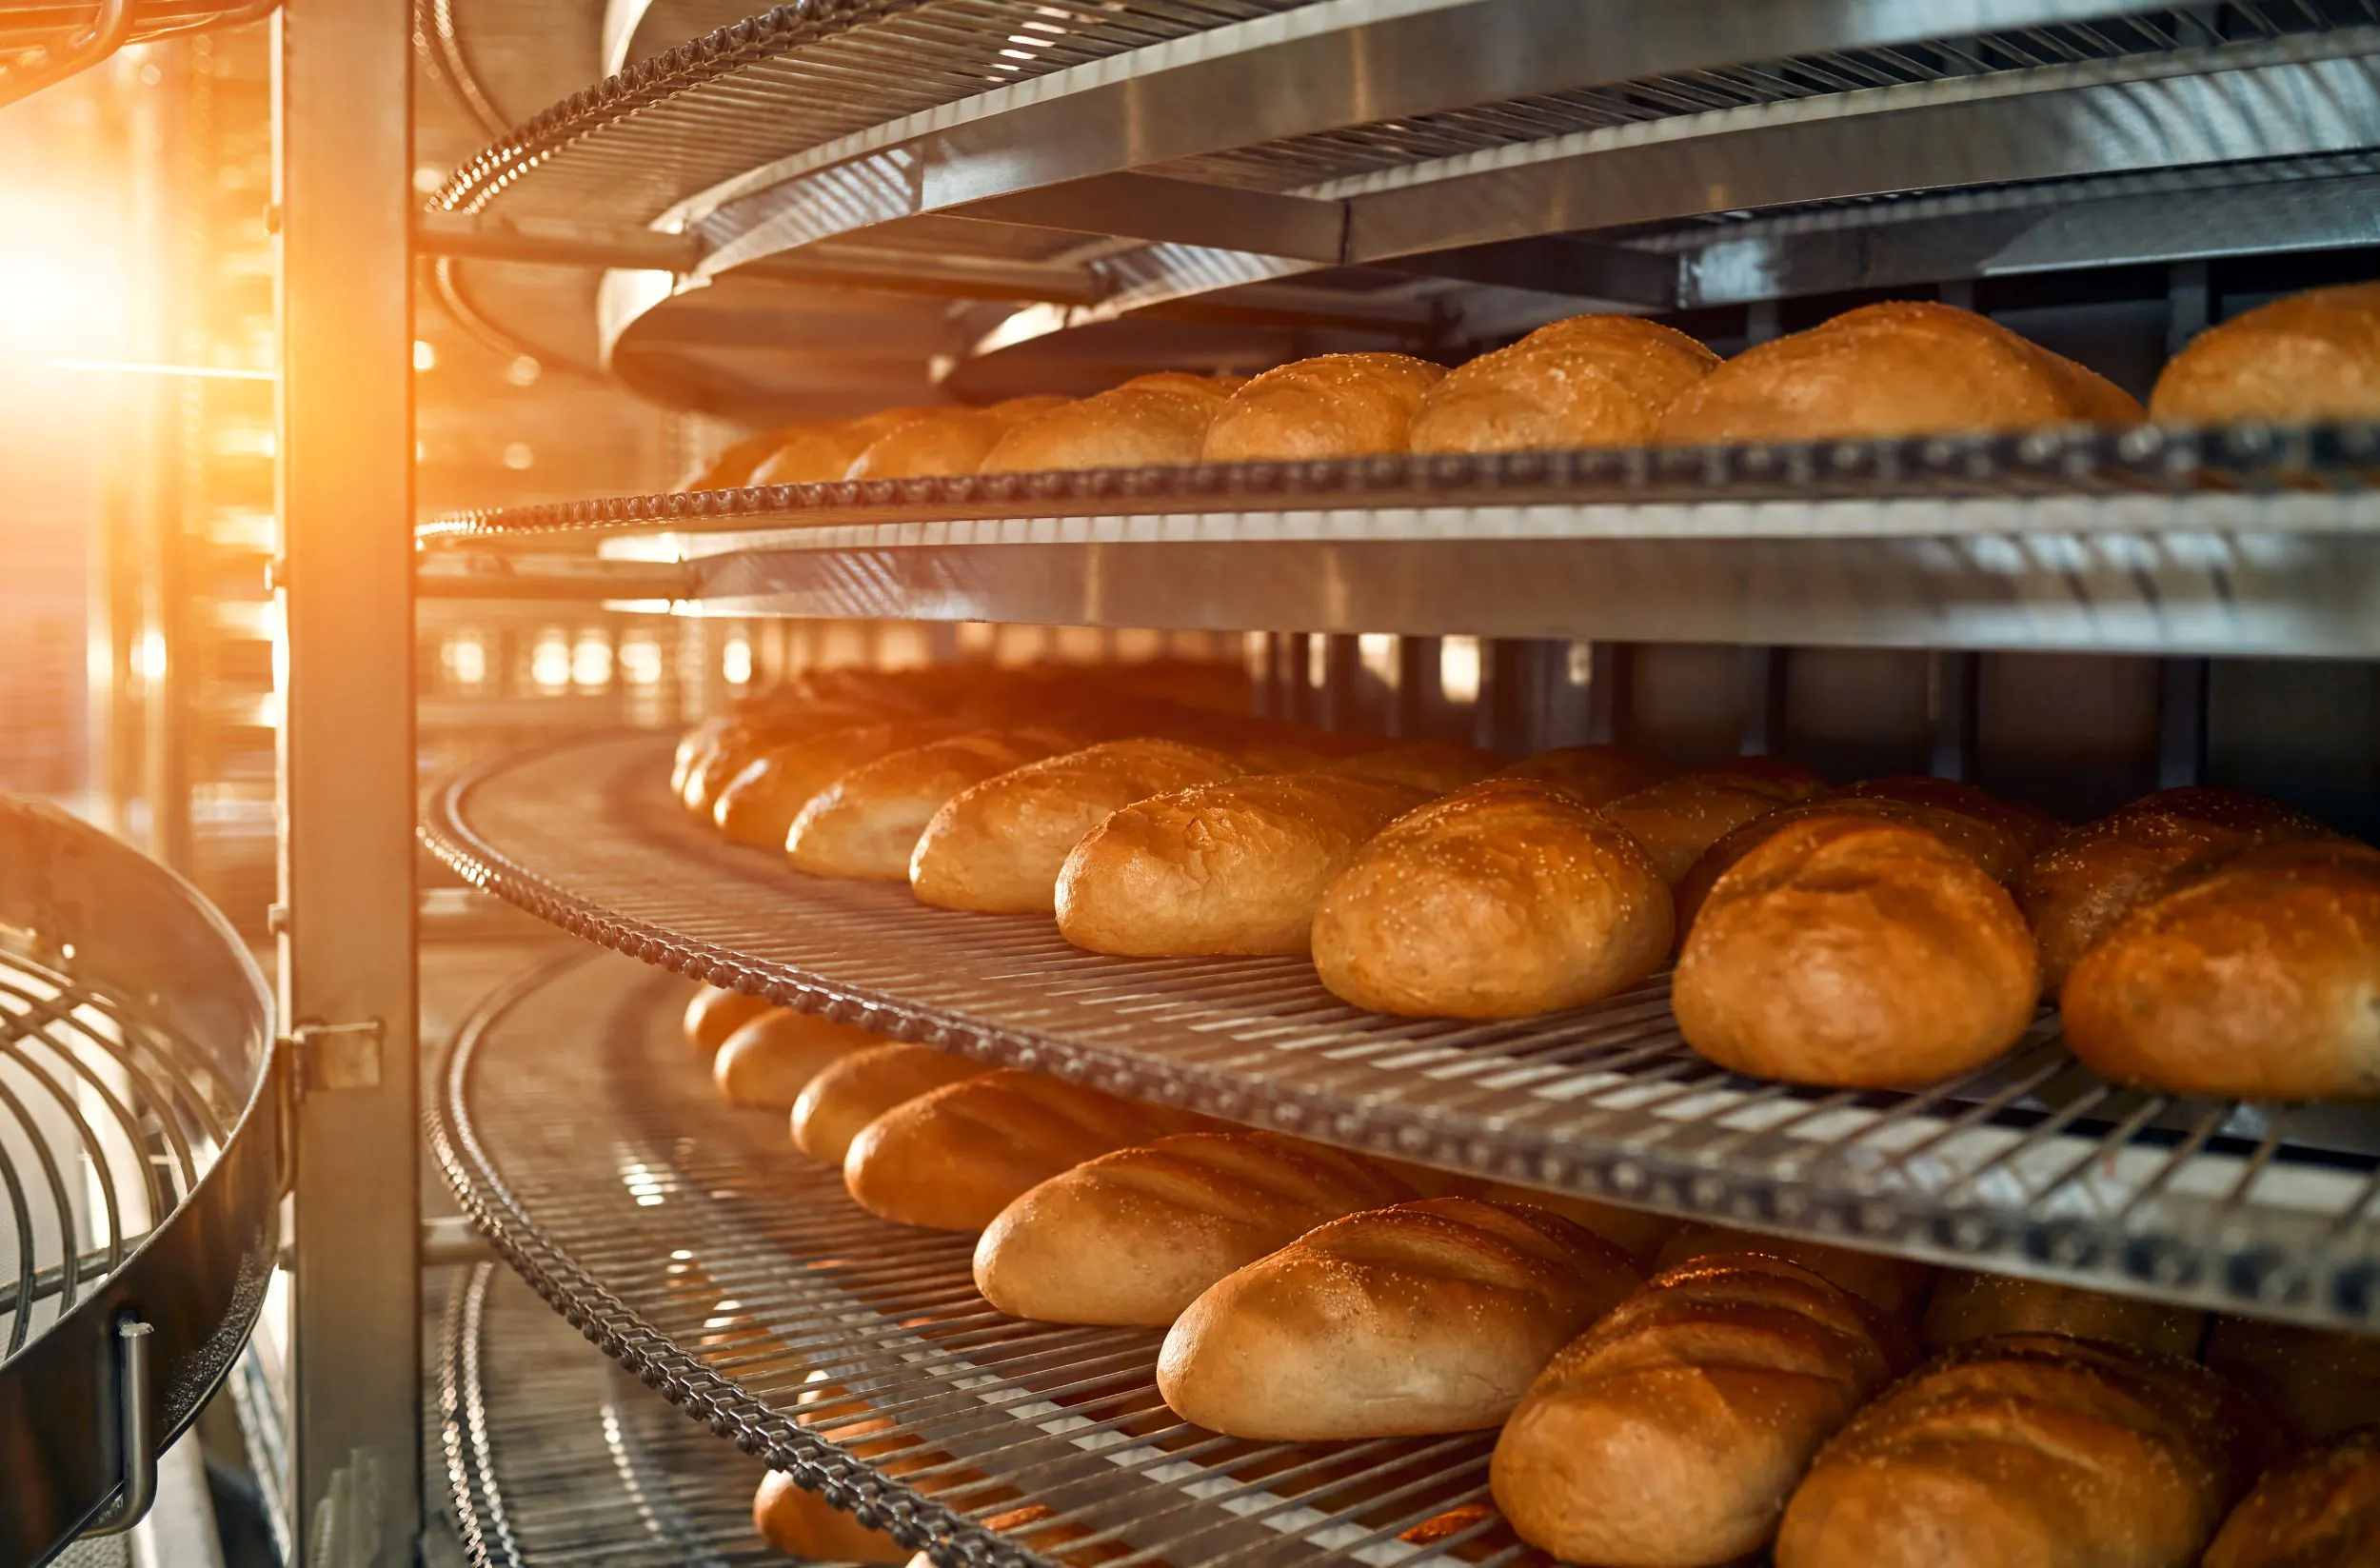 Innovative Technology Driving Growth in the Bakery Industry